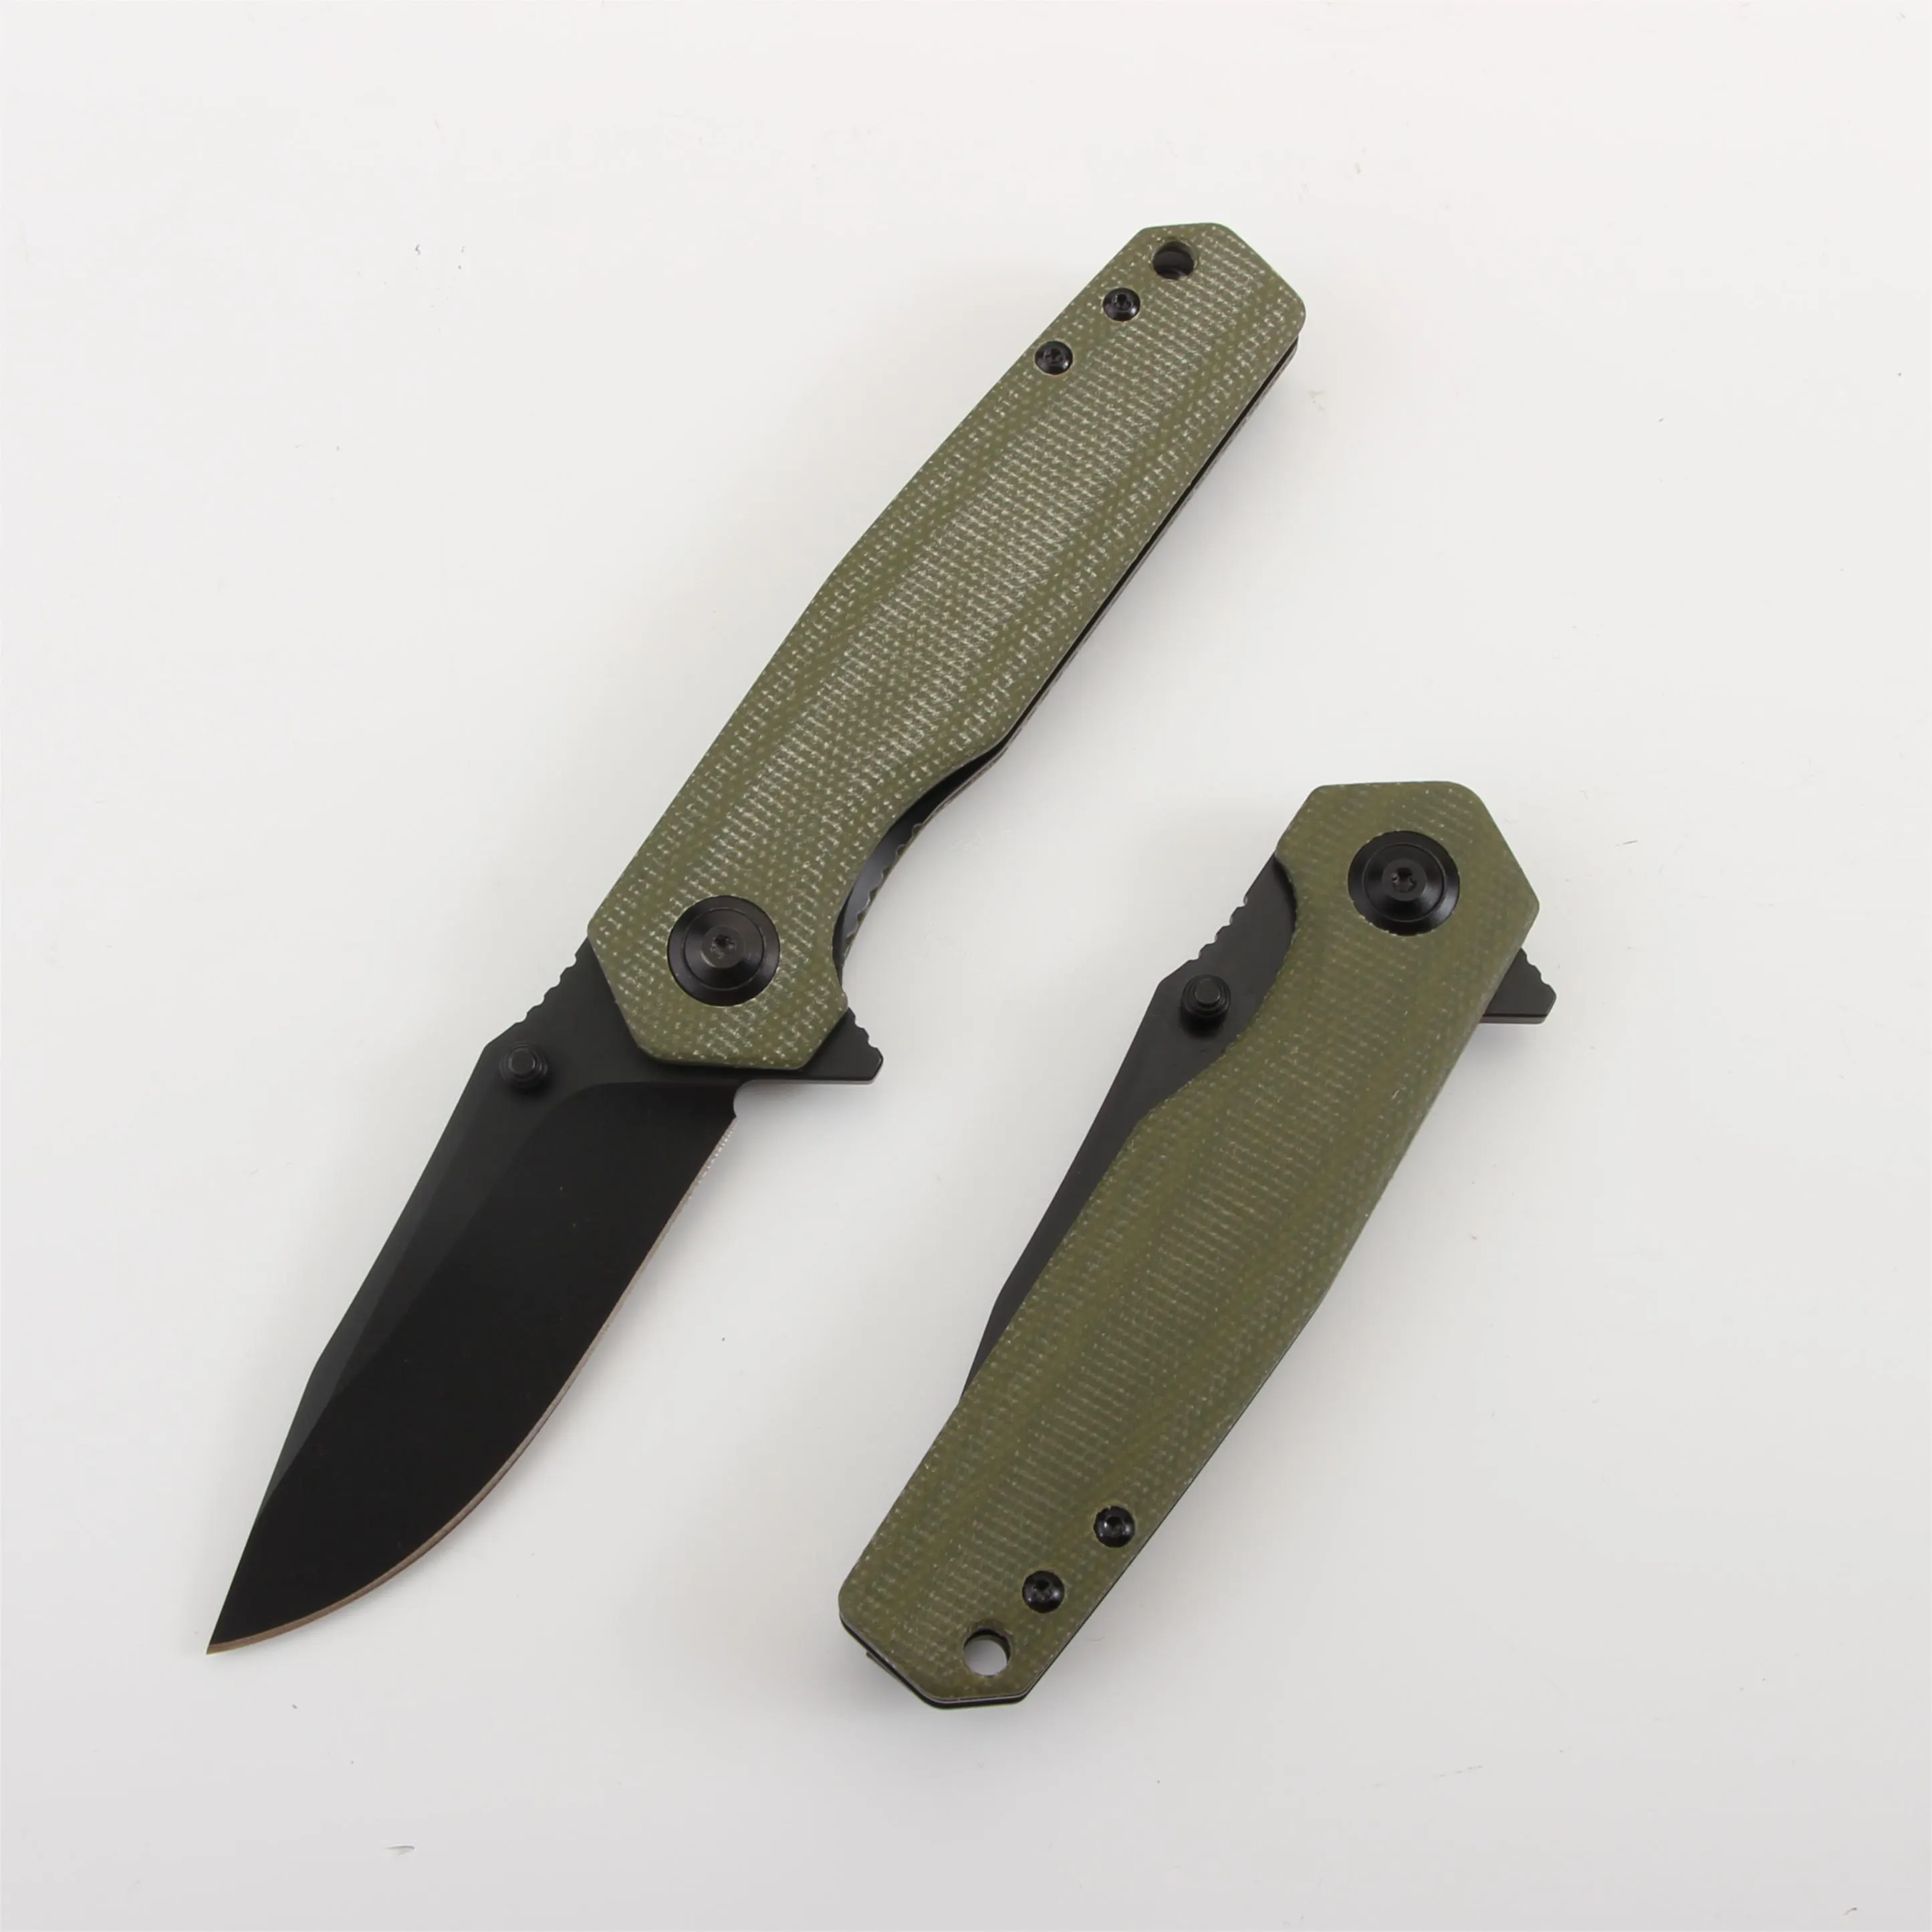 AWK High Quality Delicate Green Micarta Handle Camping Folding Knife Outdoor Pocket Knife